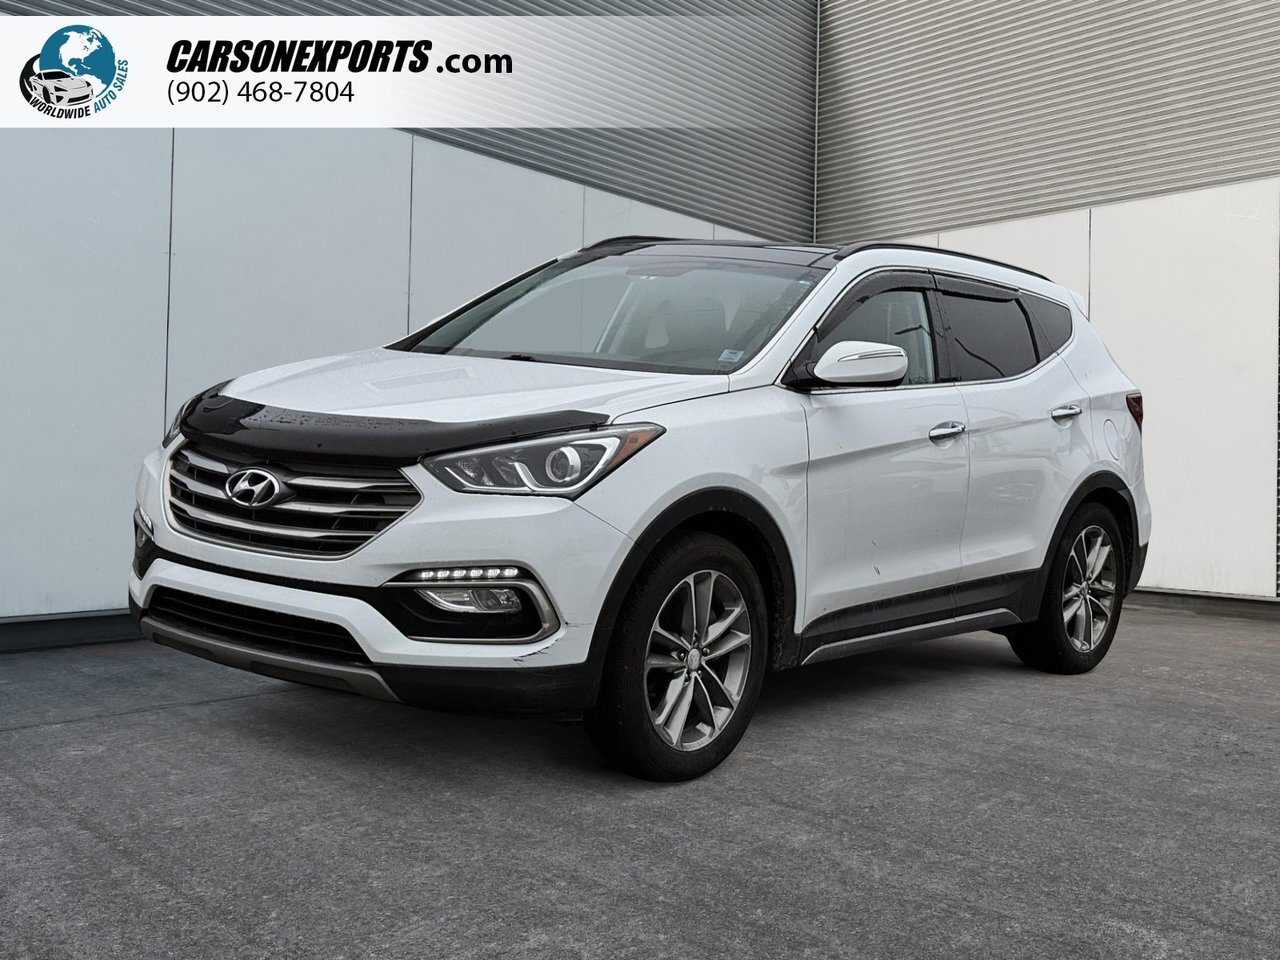 2017 Hyundai Santa Fe Sport 2.0T Limited The best place to buy a used car. Per